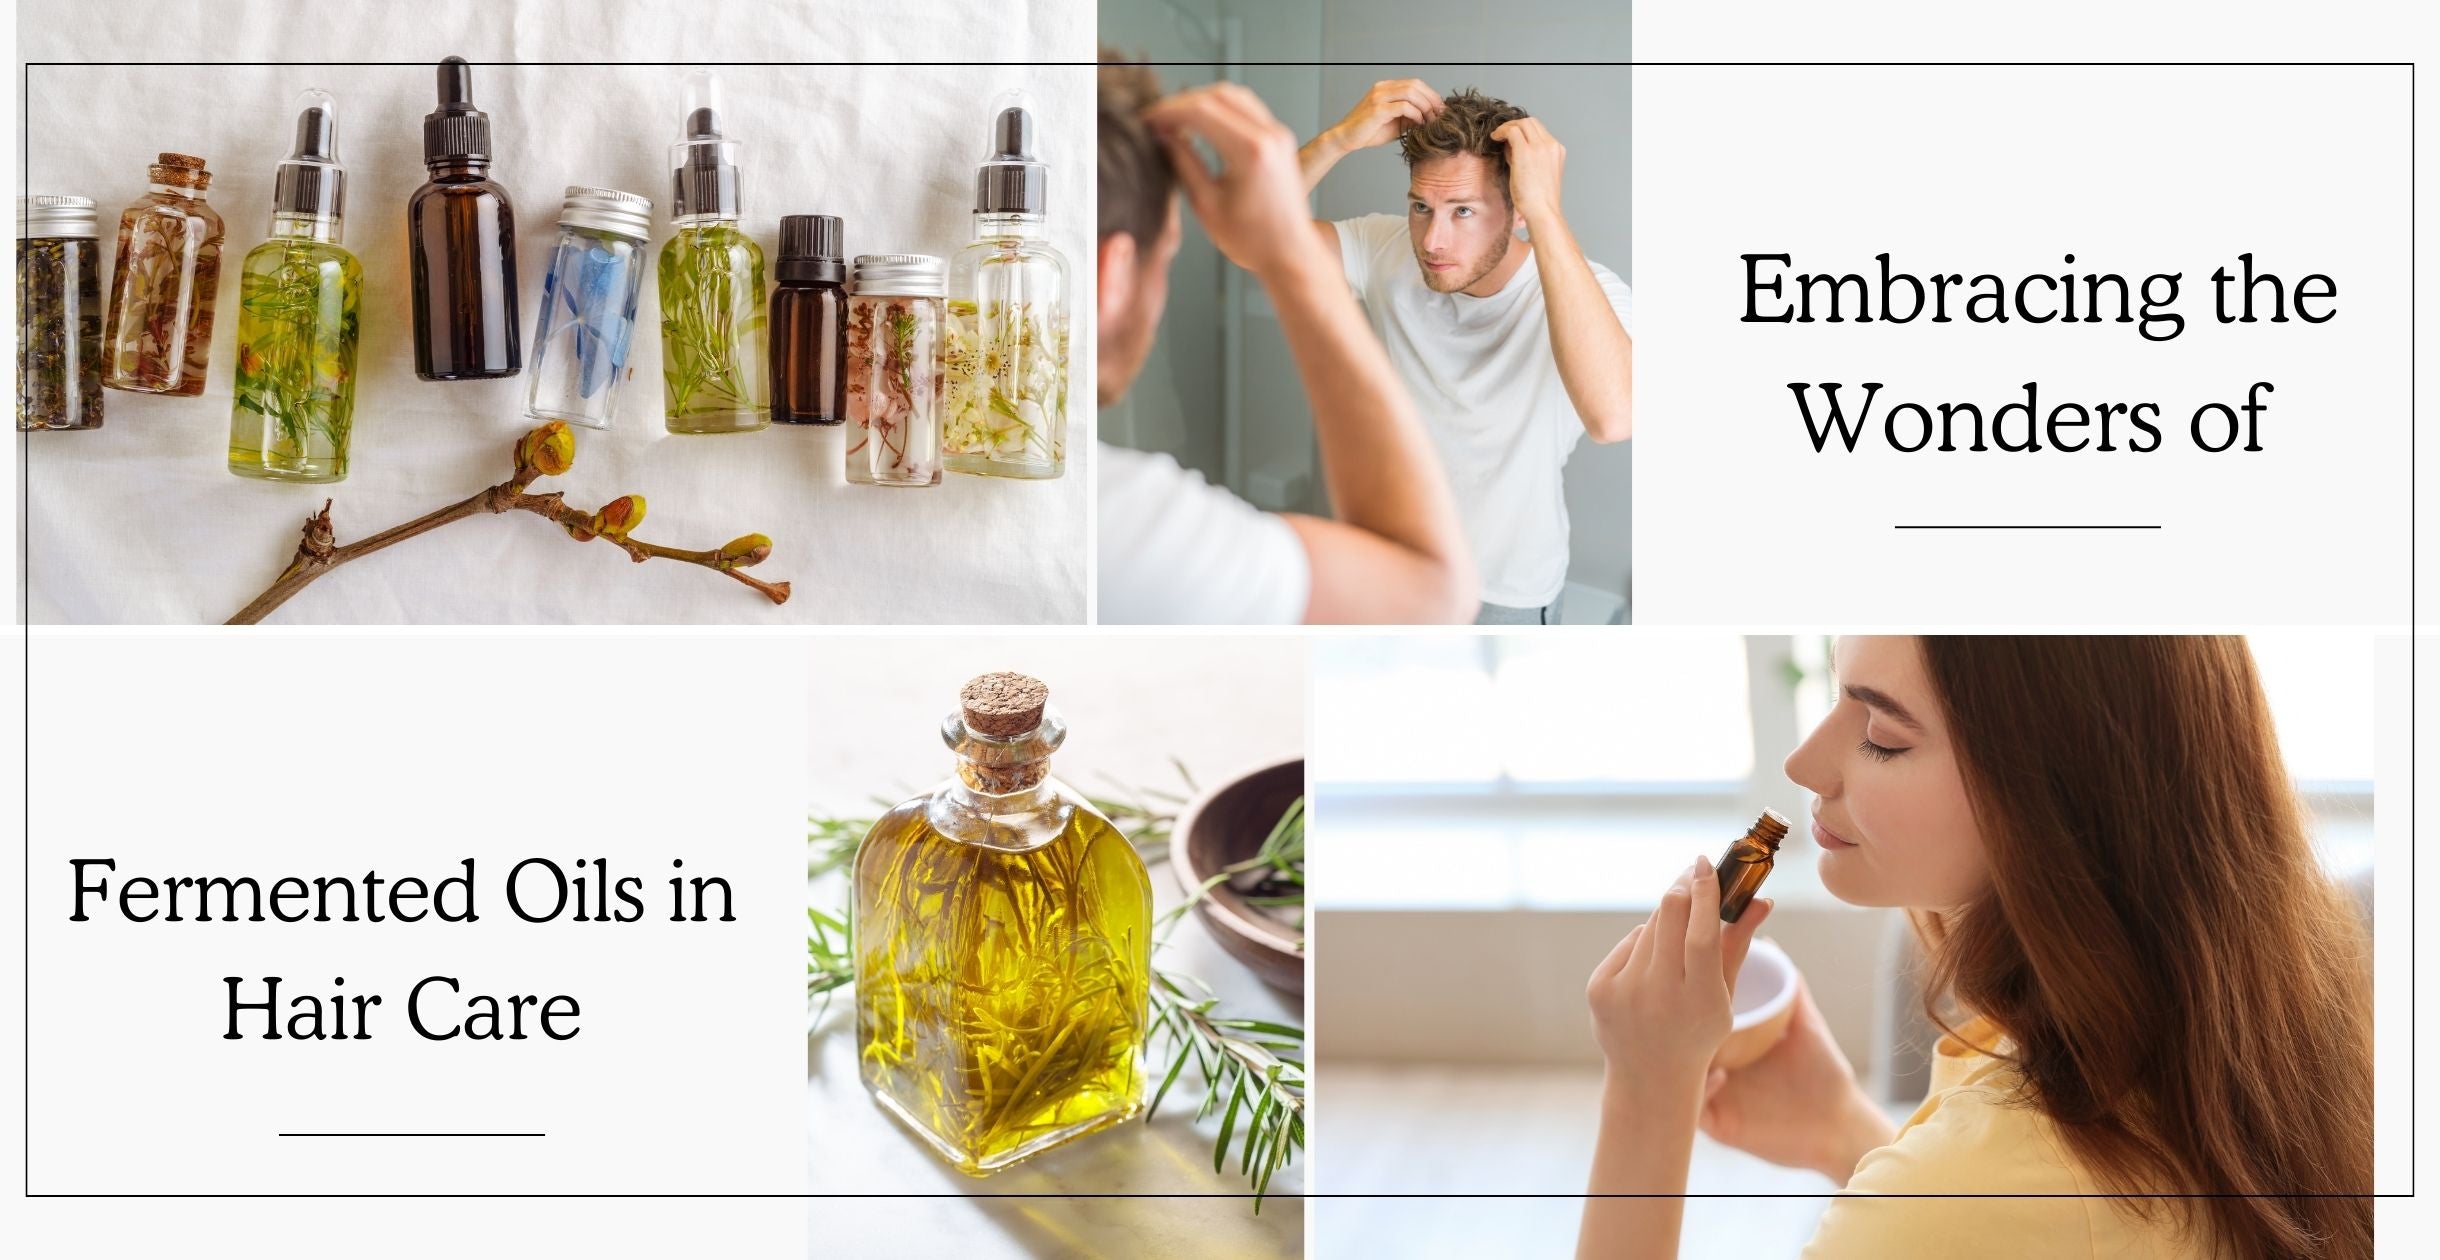 Embracing the Wonders of Fermented Oils in Hair Care